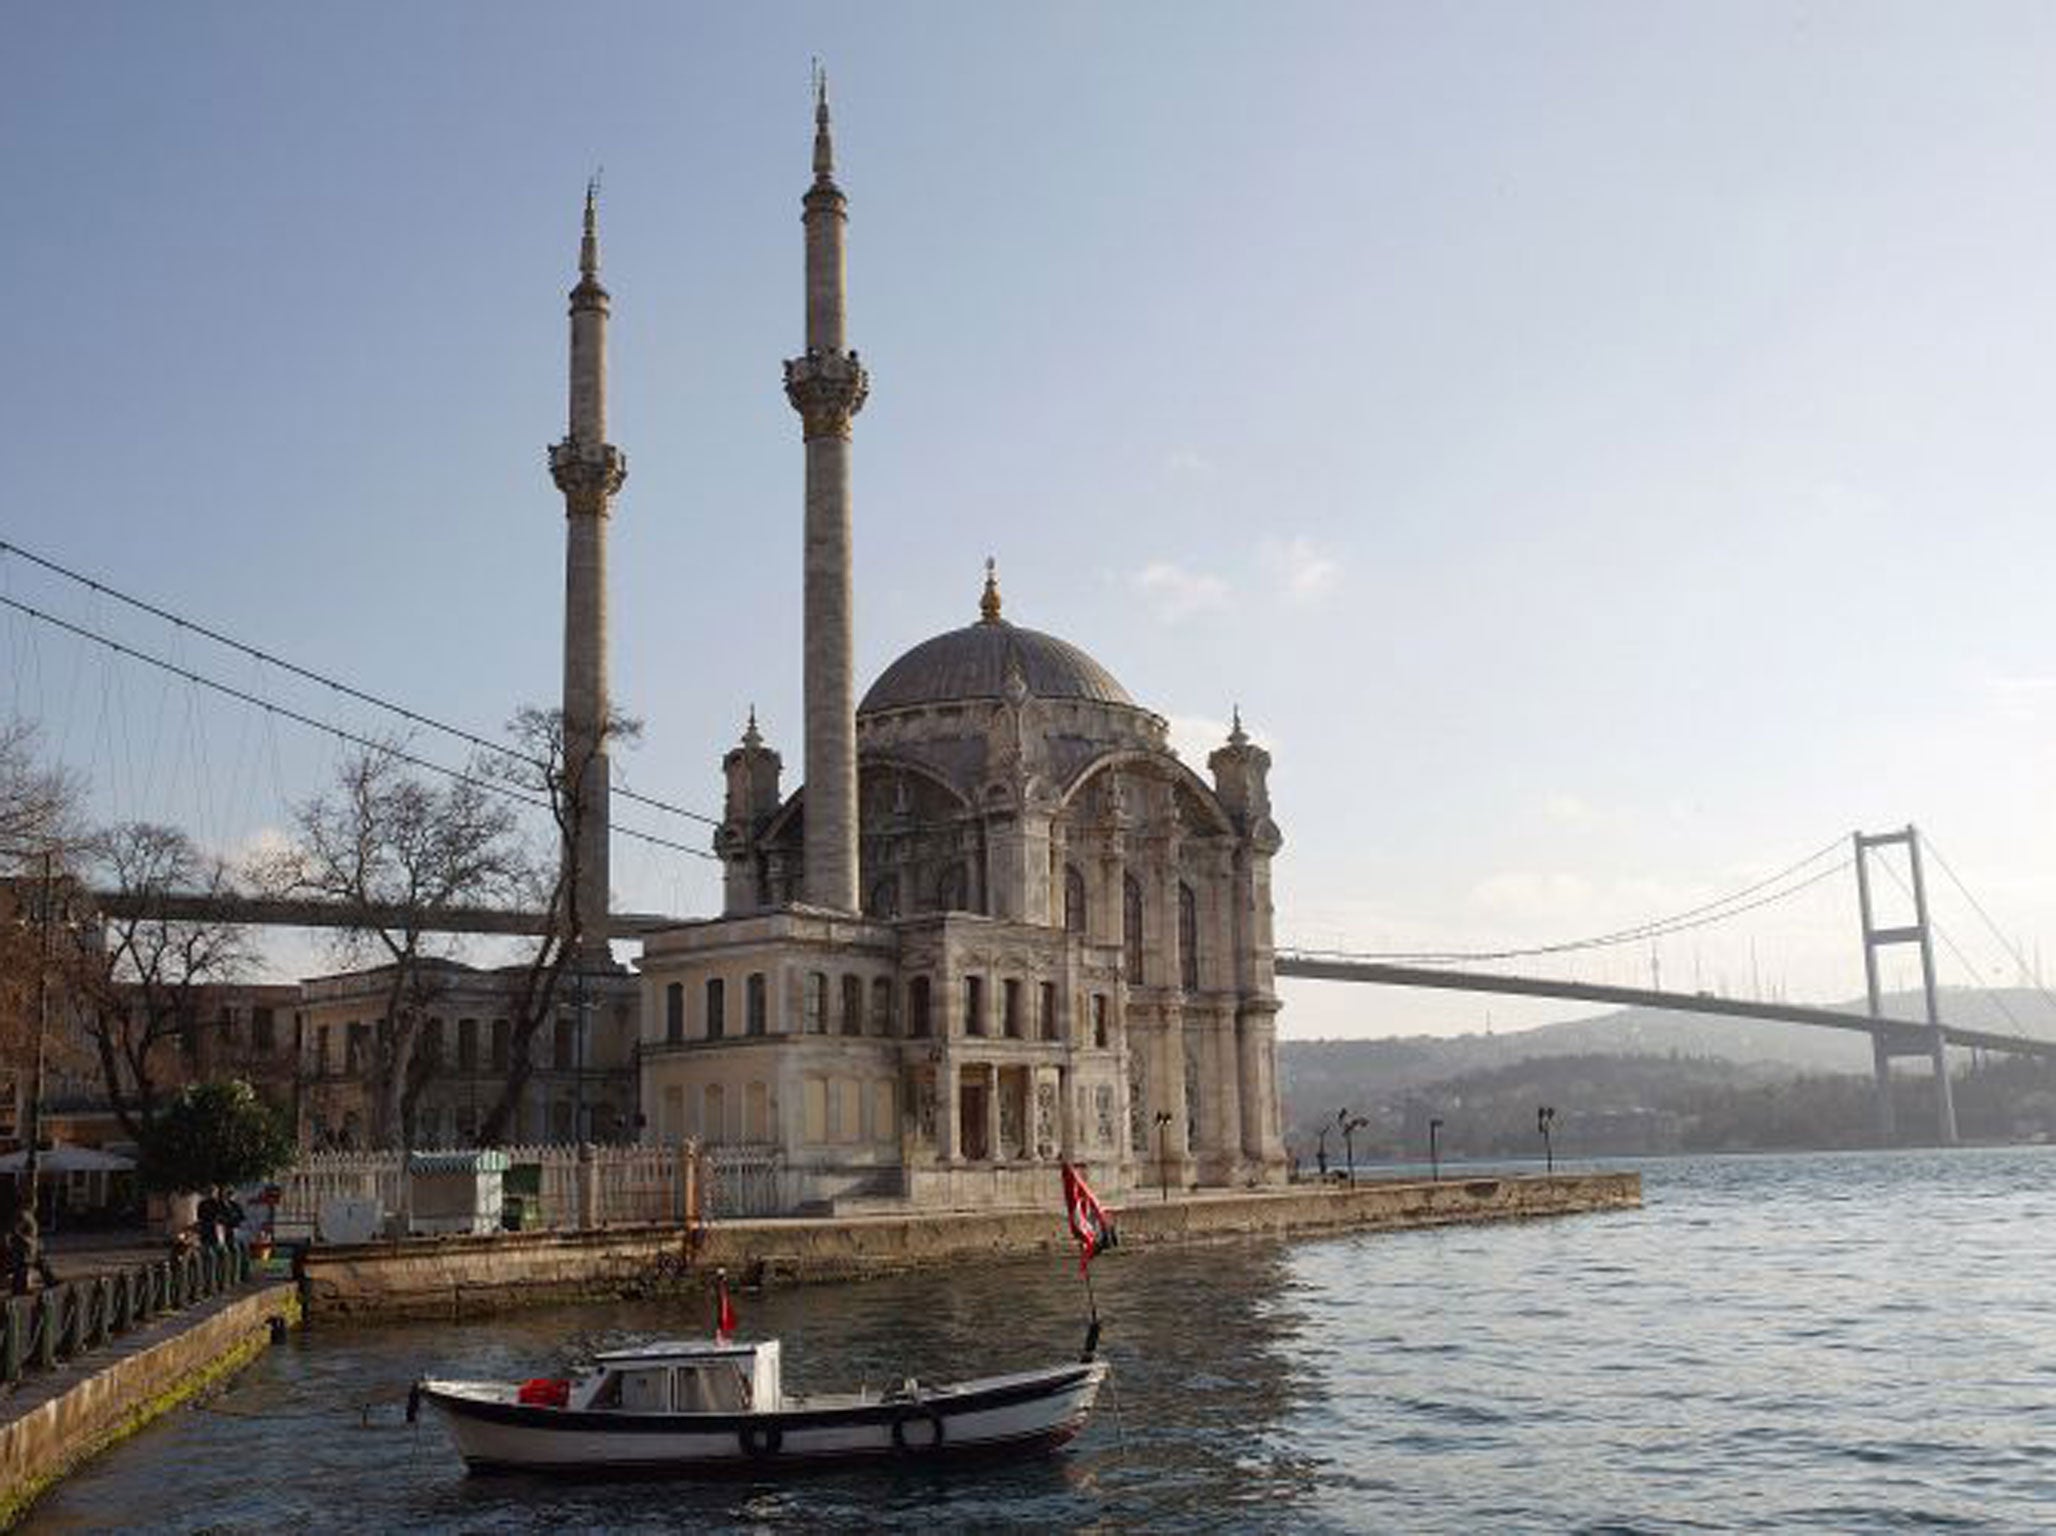 Visa vision: Turkey has tricky new entry rules